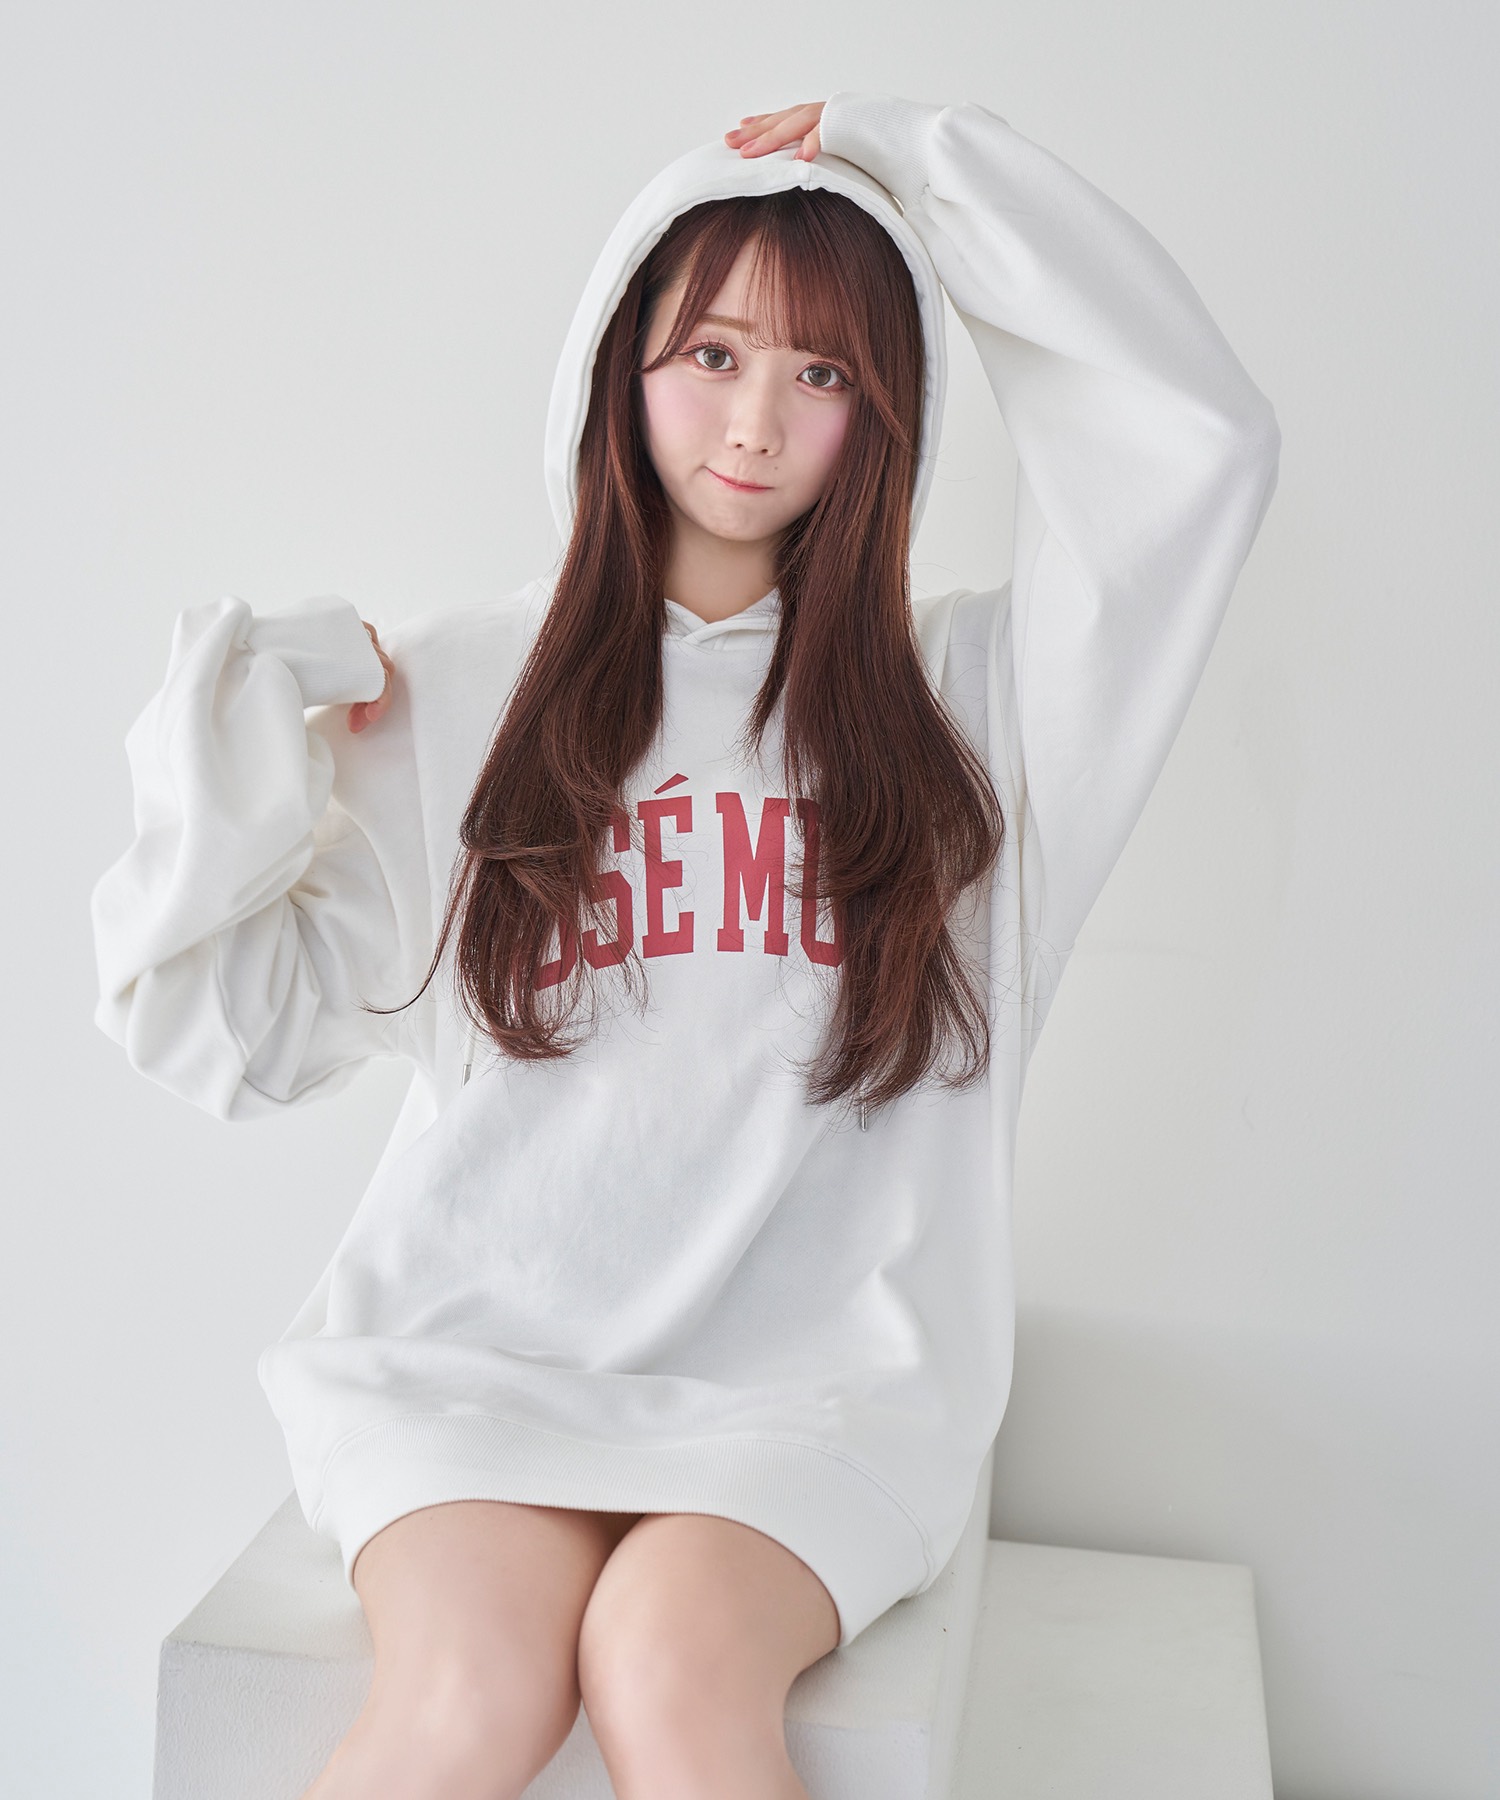 ROSE MUSE college hoodie【white】